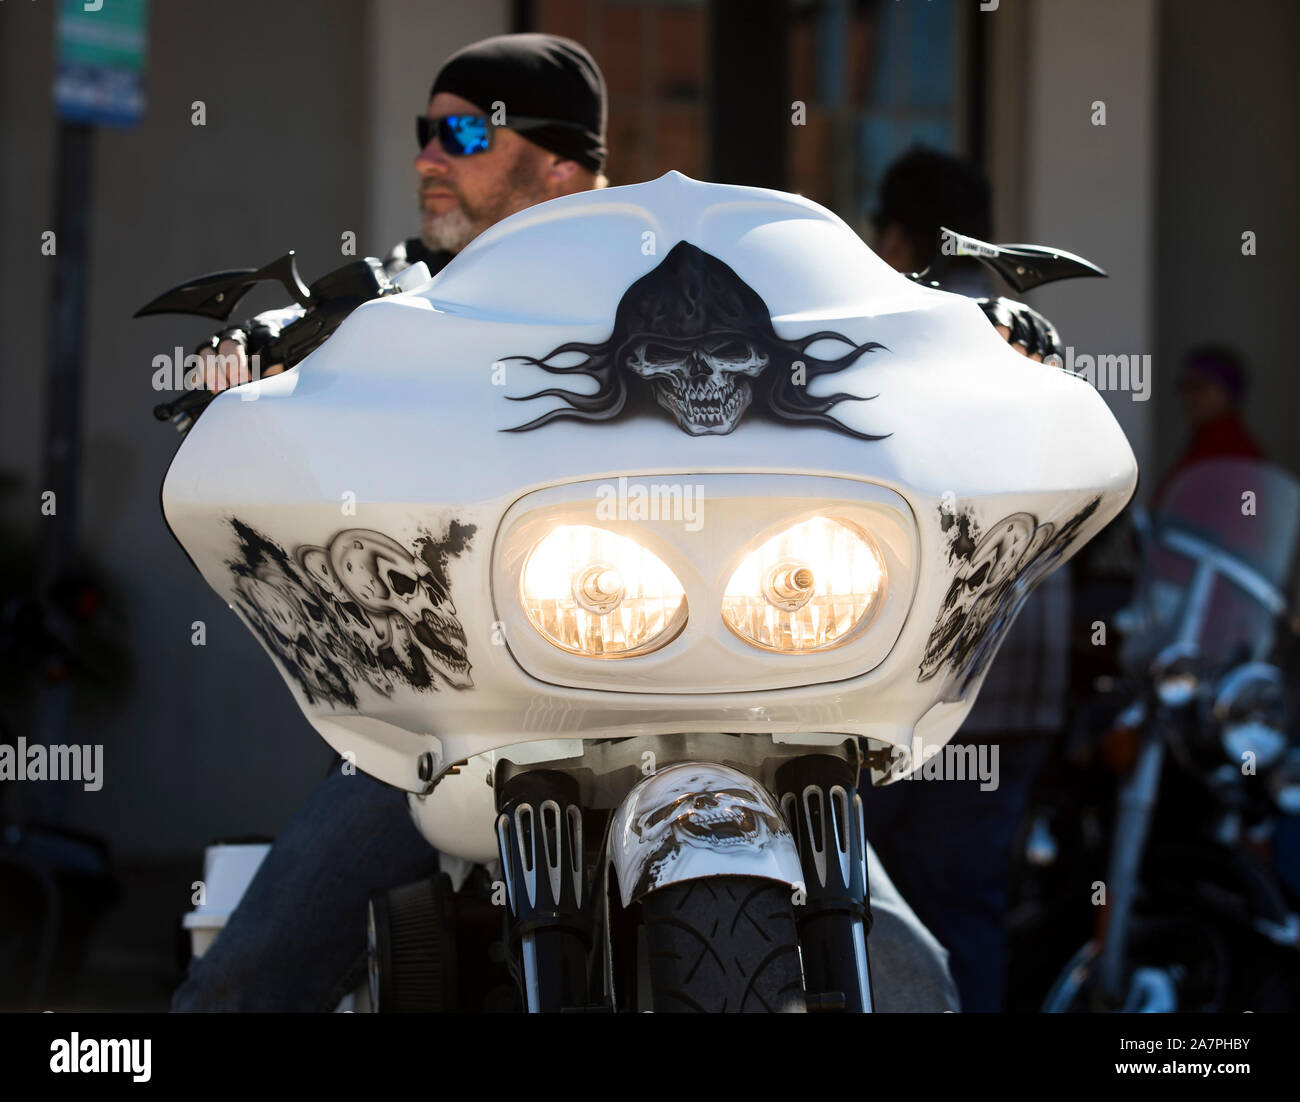 Houston, USA. 3rd Nov, 2019. A motorcyclist parks his skeleton-themed bike at the Lone Star Rally in downtown Galveston, Texas, the United States, on Nov. 3, 2019. The annual Lone Star Rally is one of the most attended events in Galveston. Credit: Yi-Chin Lee/Xinhua/Alamy Live News Stock Photo